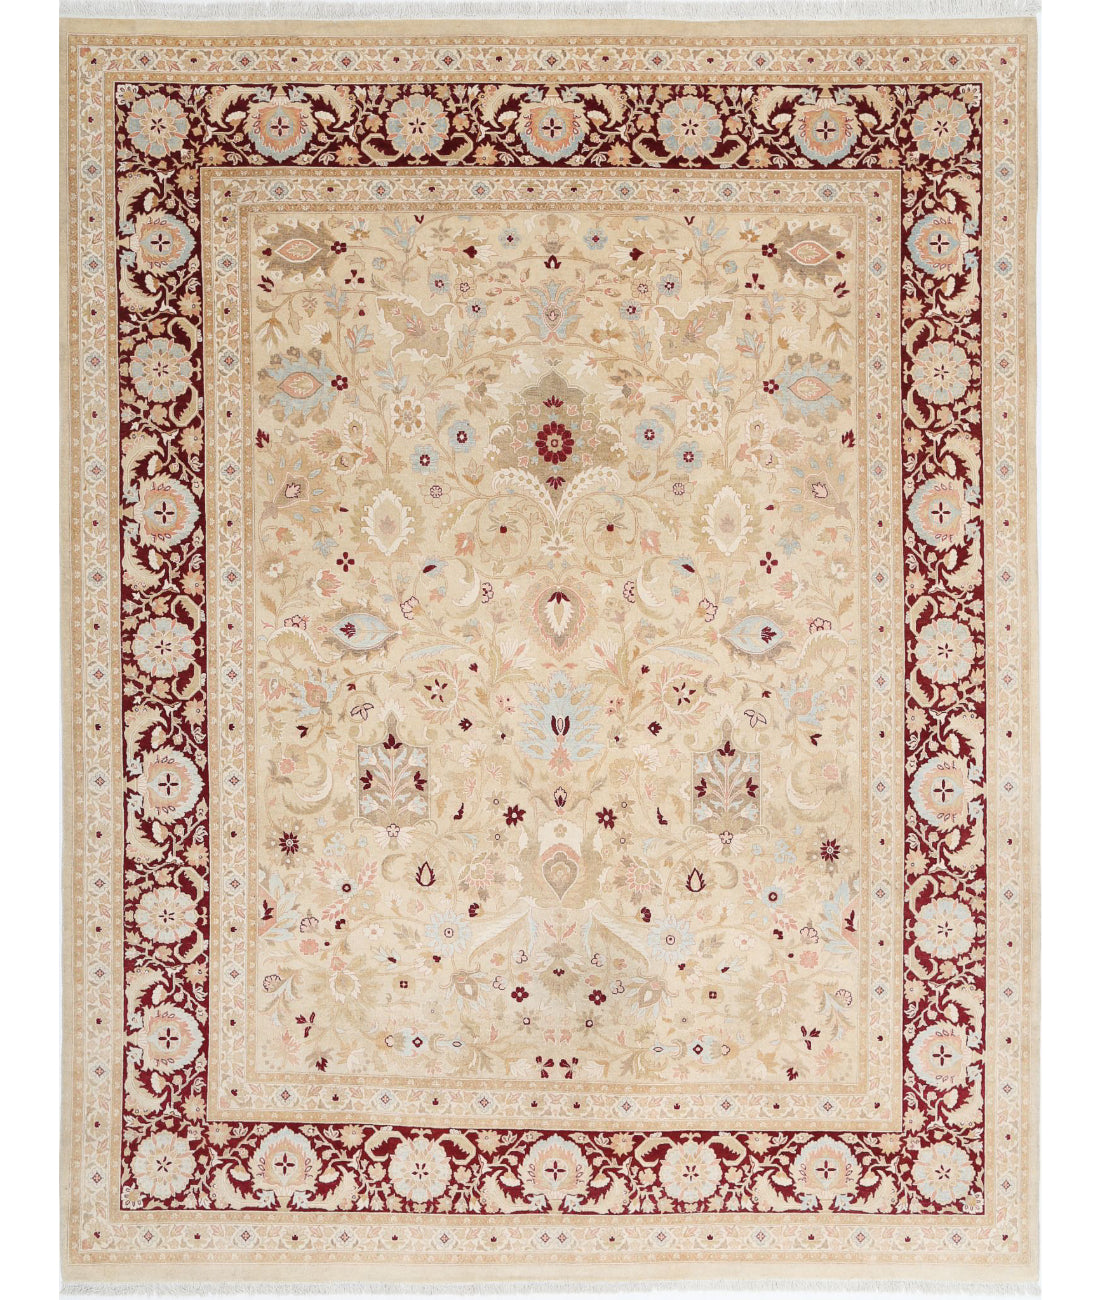 Heritage 8'1'' X 10'5'' Hand-Knotted Wool Rug 8'1'' x 10'5'' (243 X 313) / Beige / Burgundy